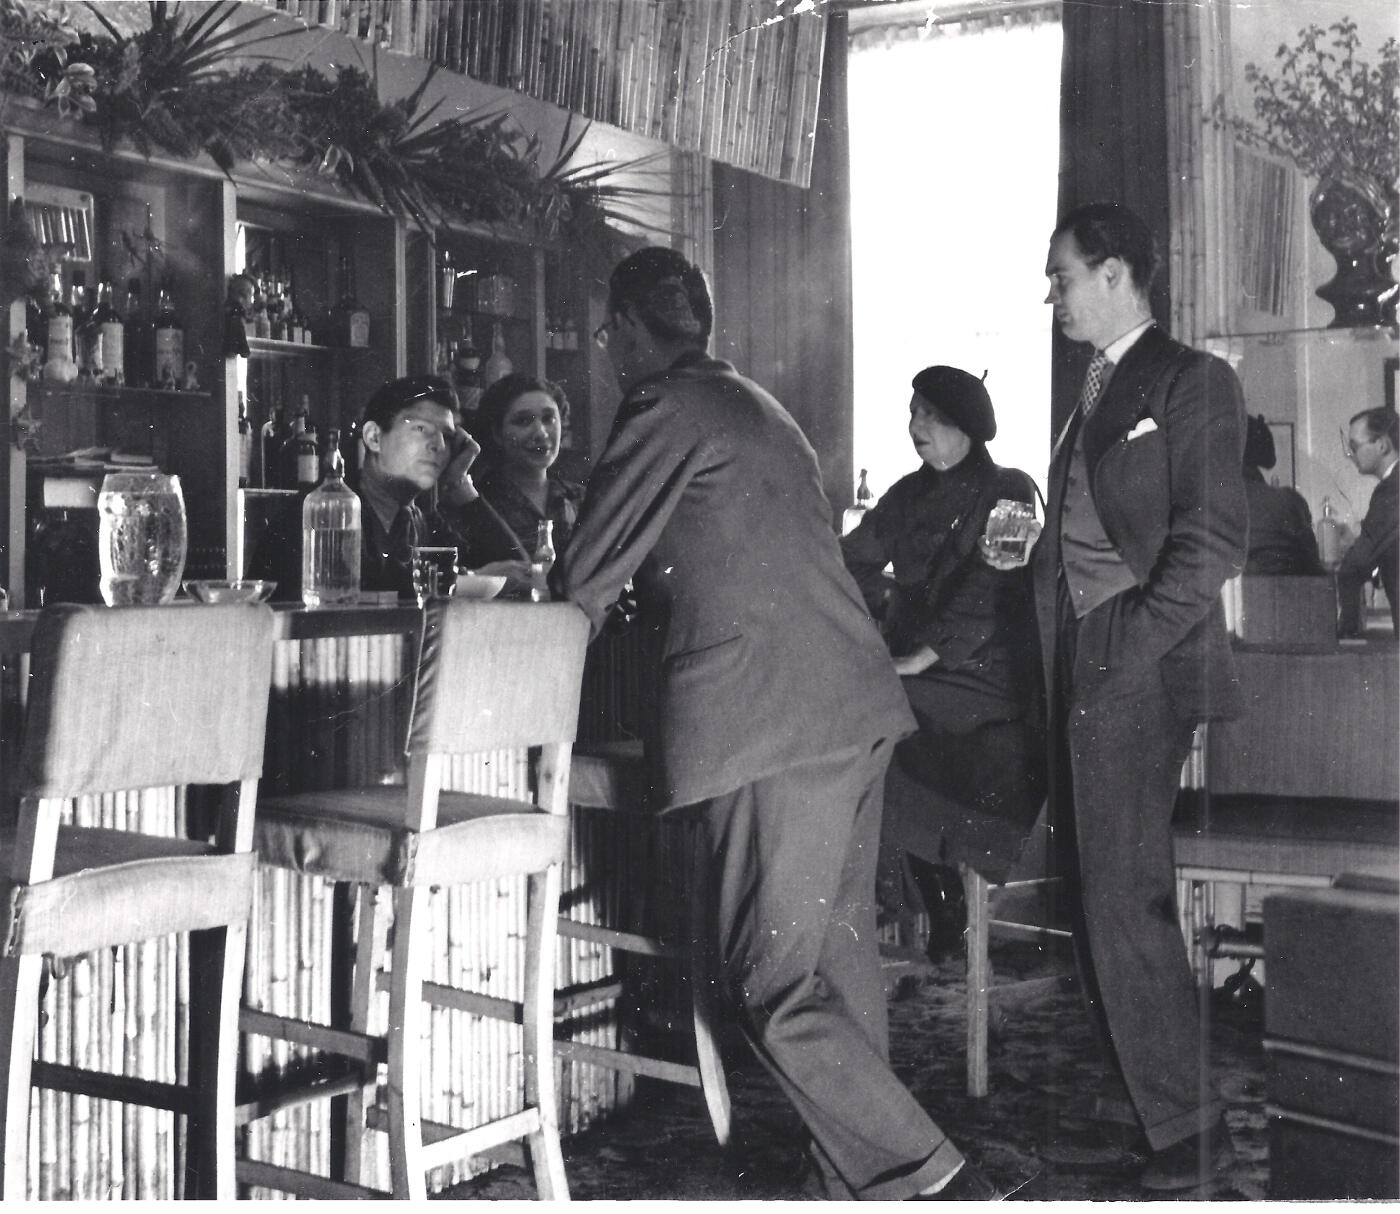 The photograph shows Ian Board, Colony Room bartender and later proprietor (seated behind bar), Carmel Stuart, Muriel Belcher's lover (seated behind bar), Nina Hamnett, artist and bohemian (seated at bar)